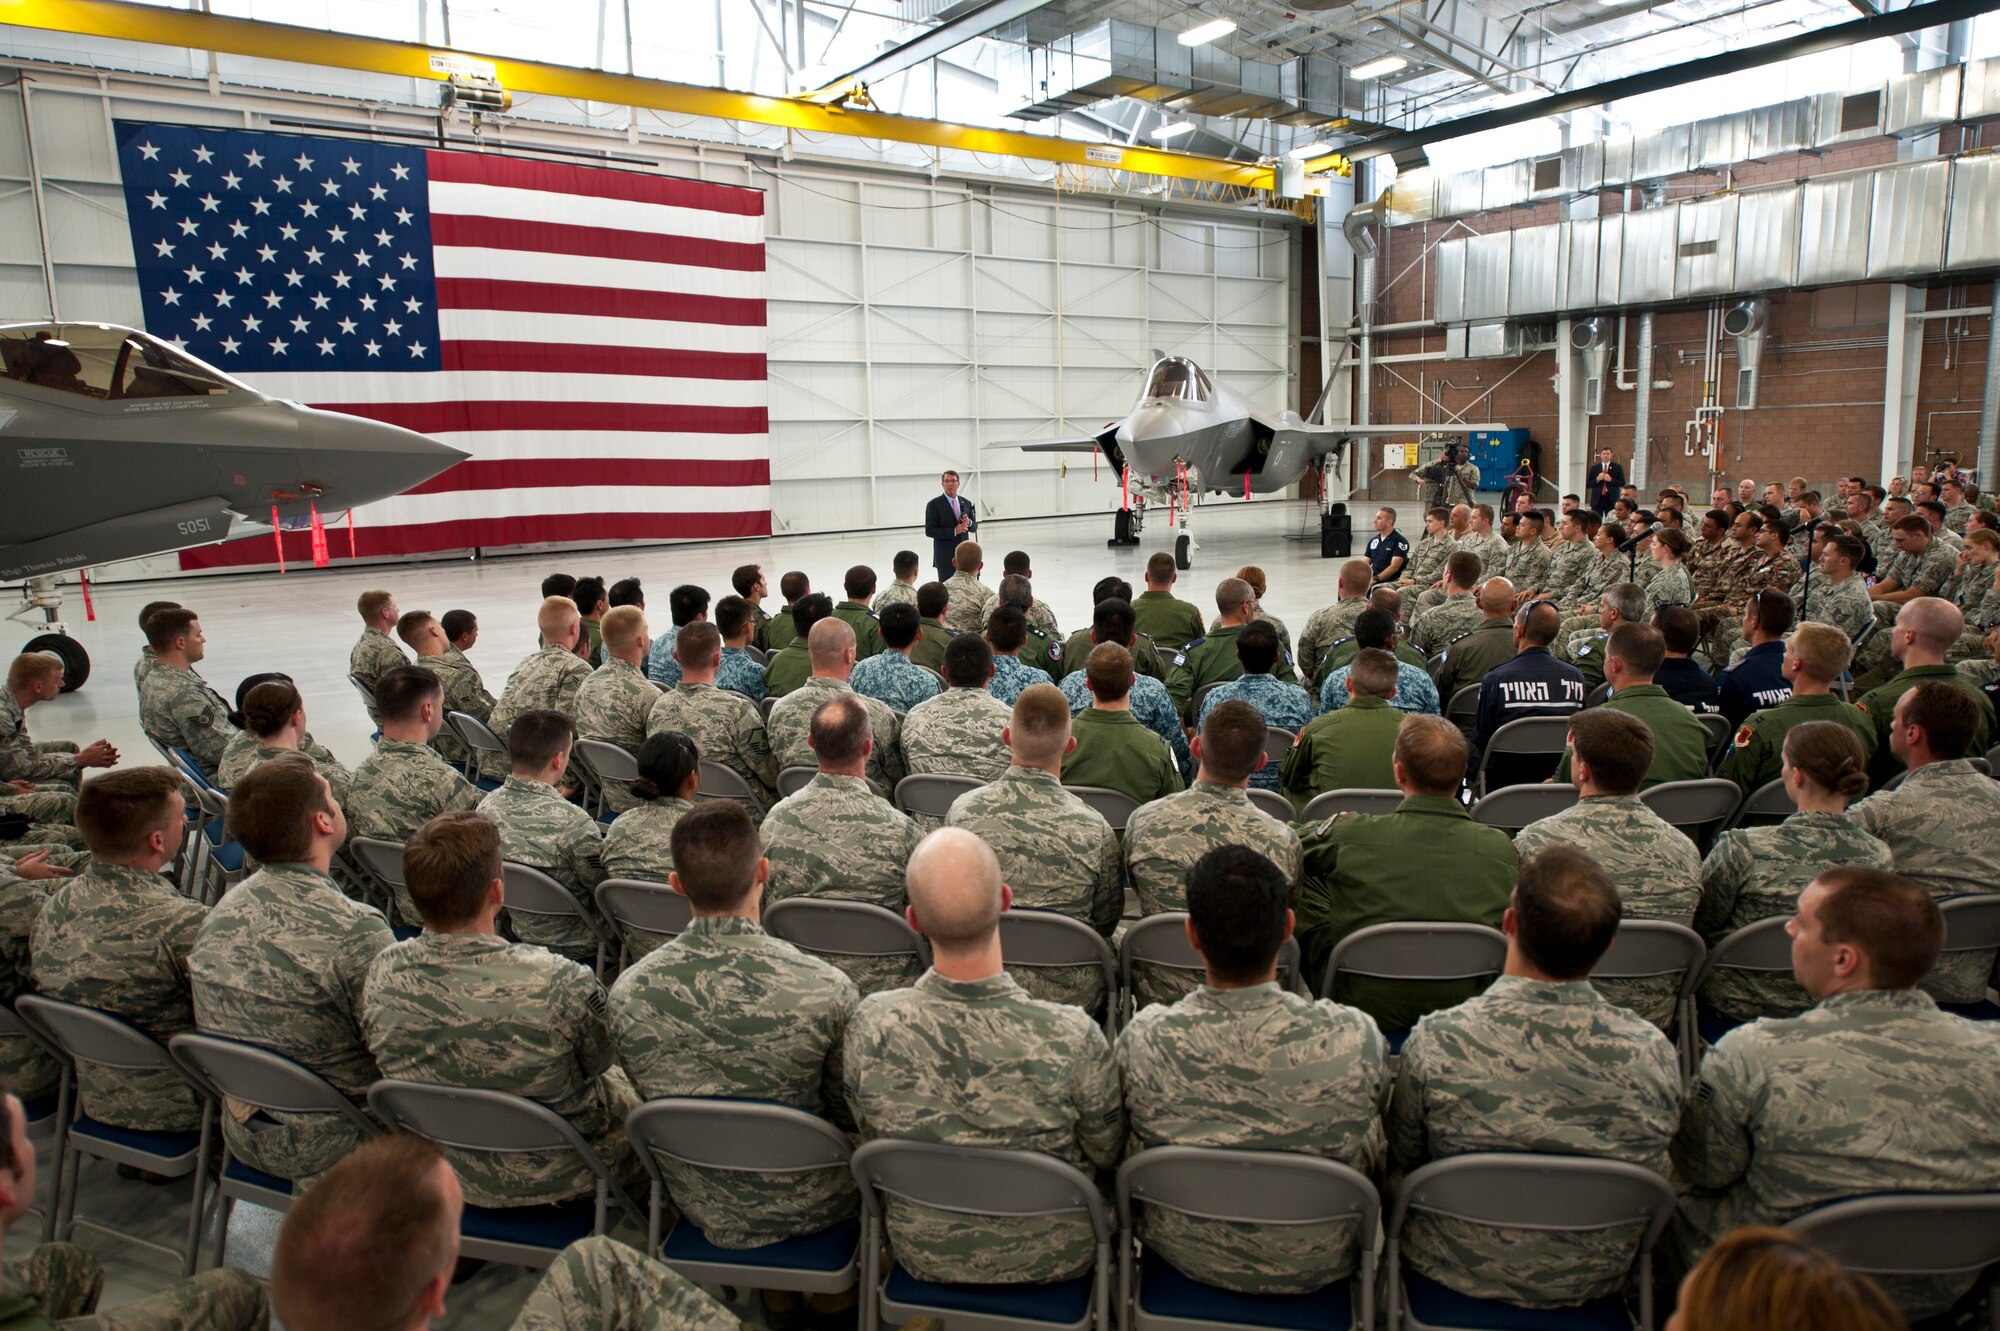 Defense Secretary Ash Carter addresses Airmen and coalition partners during an all call at Nellis Air Force Base, Nev., Aug. 26, 2015. During the secretary’s visit to Nellis he observed Red Flag 15-4 and spoke to Airmen and Coalition partners. During the all call, Carter took questions from service members and addressed issues relating to budgets, force retention, morale, and operational priorities. (U.S. Air Force photo/Senior Airman Joshua Kleinholz)